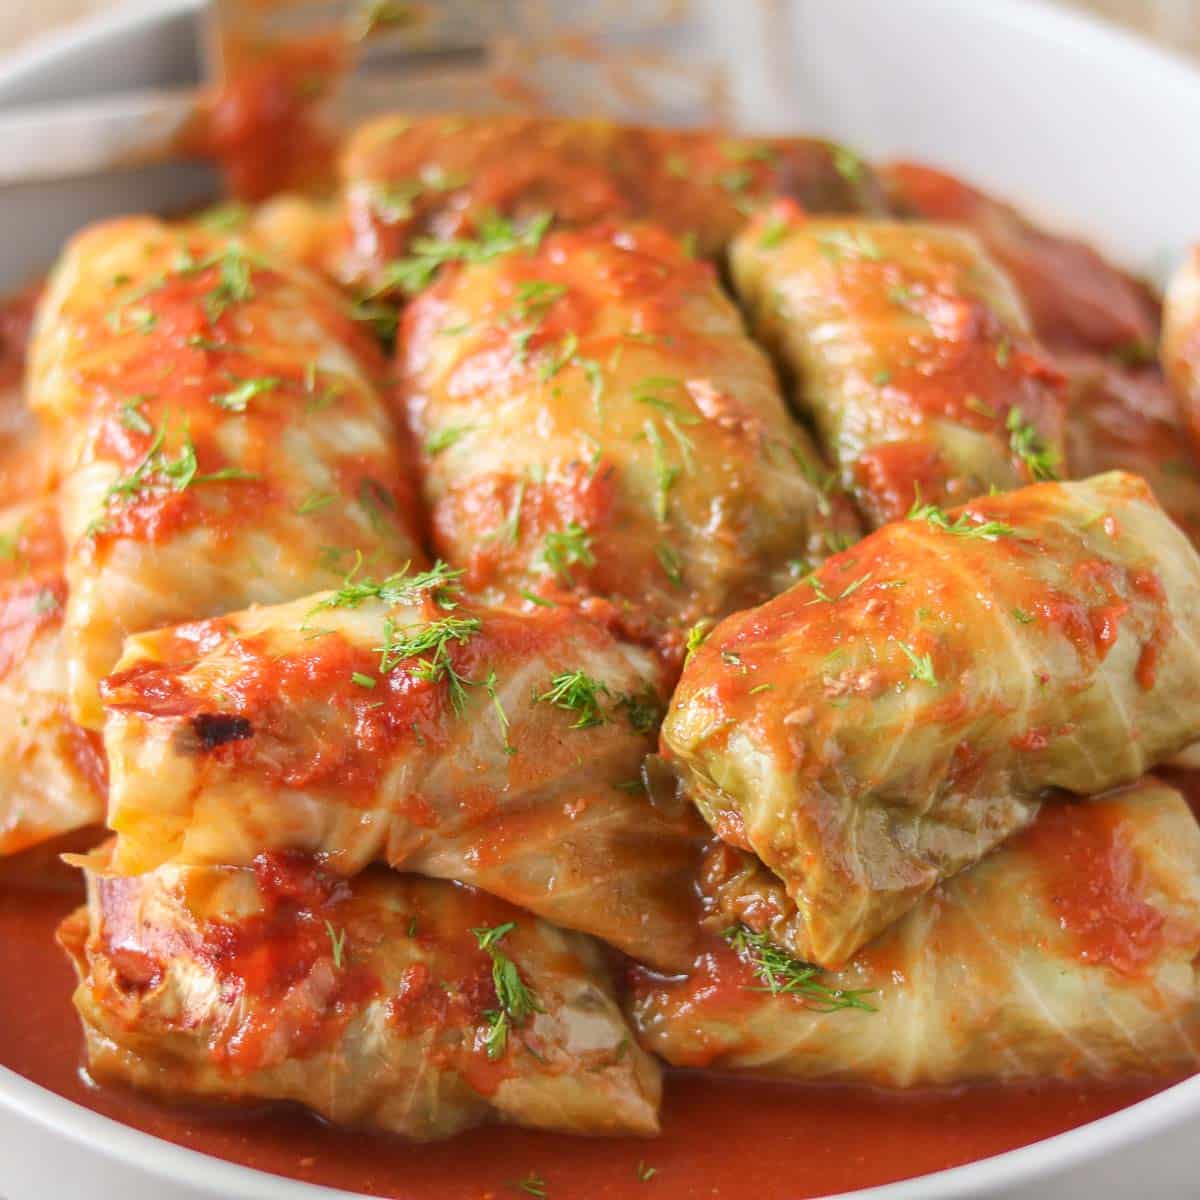 Stuffed cabbage rolls (Hunky hand grenades).. Cheap and easy